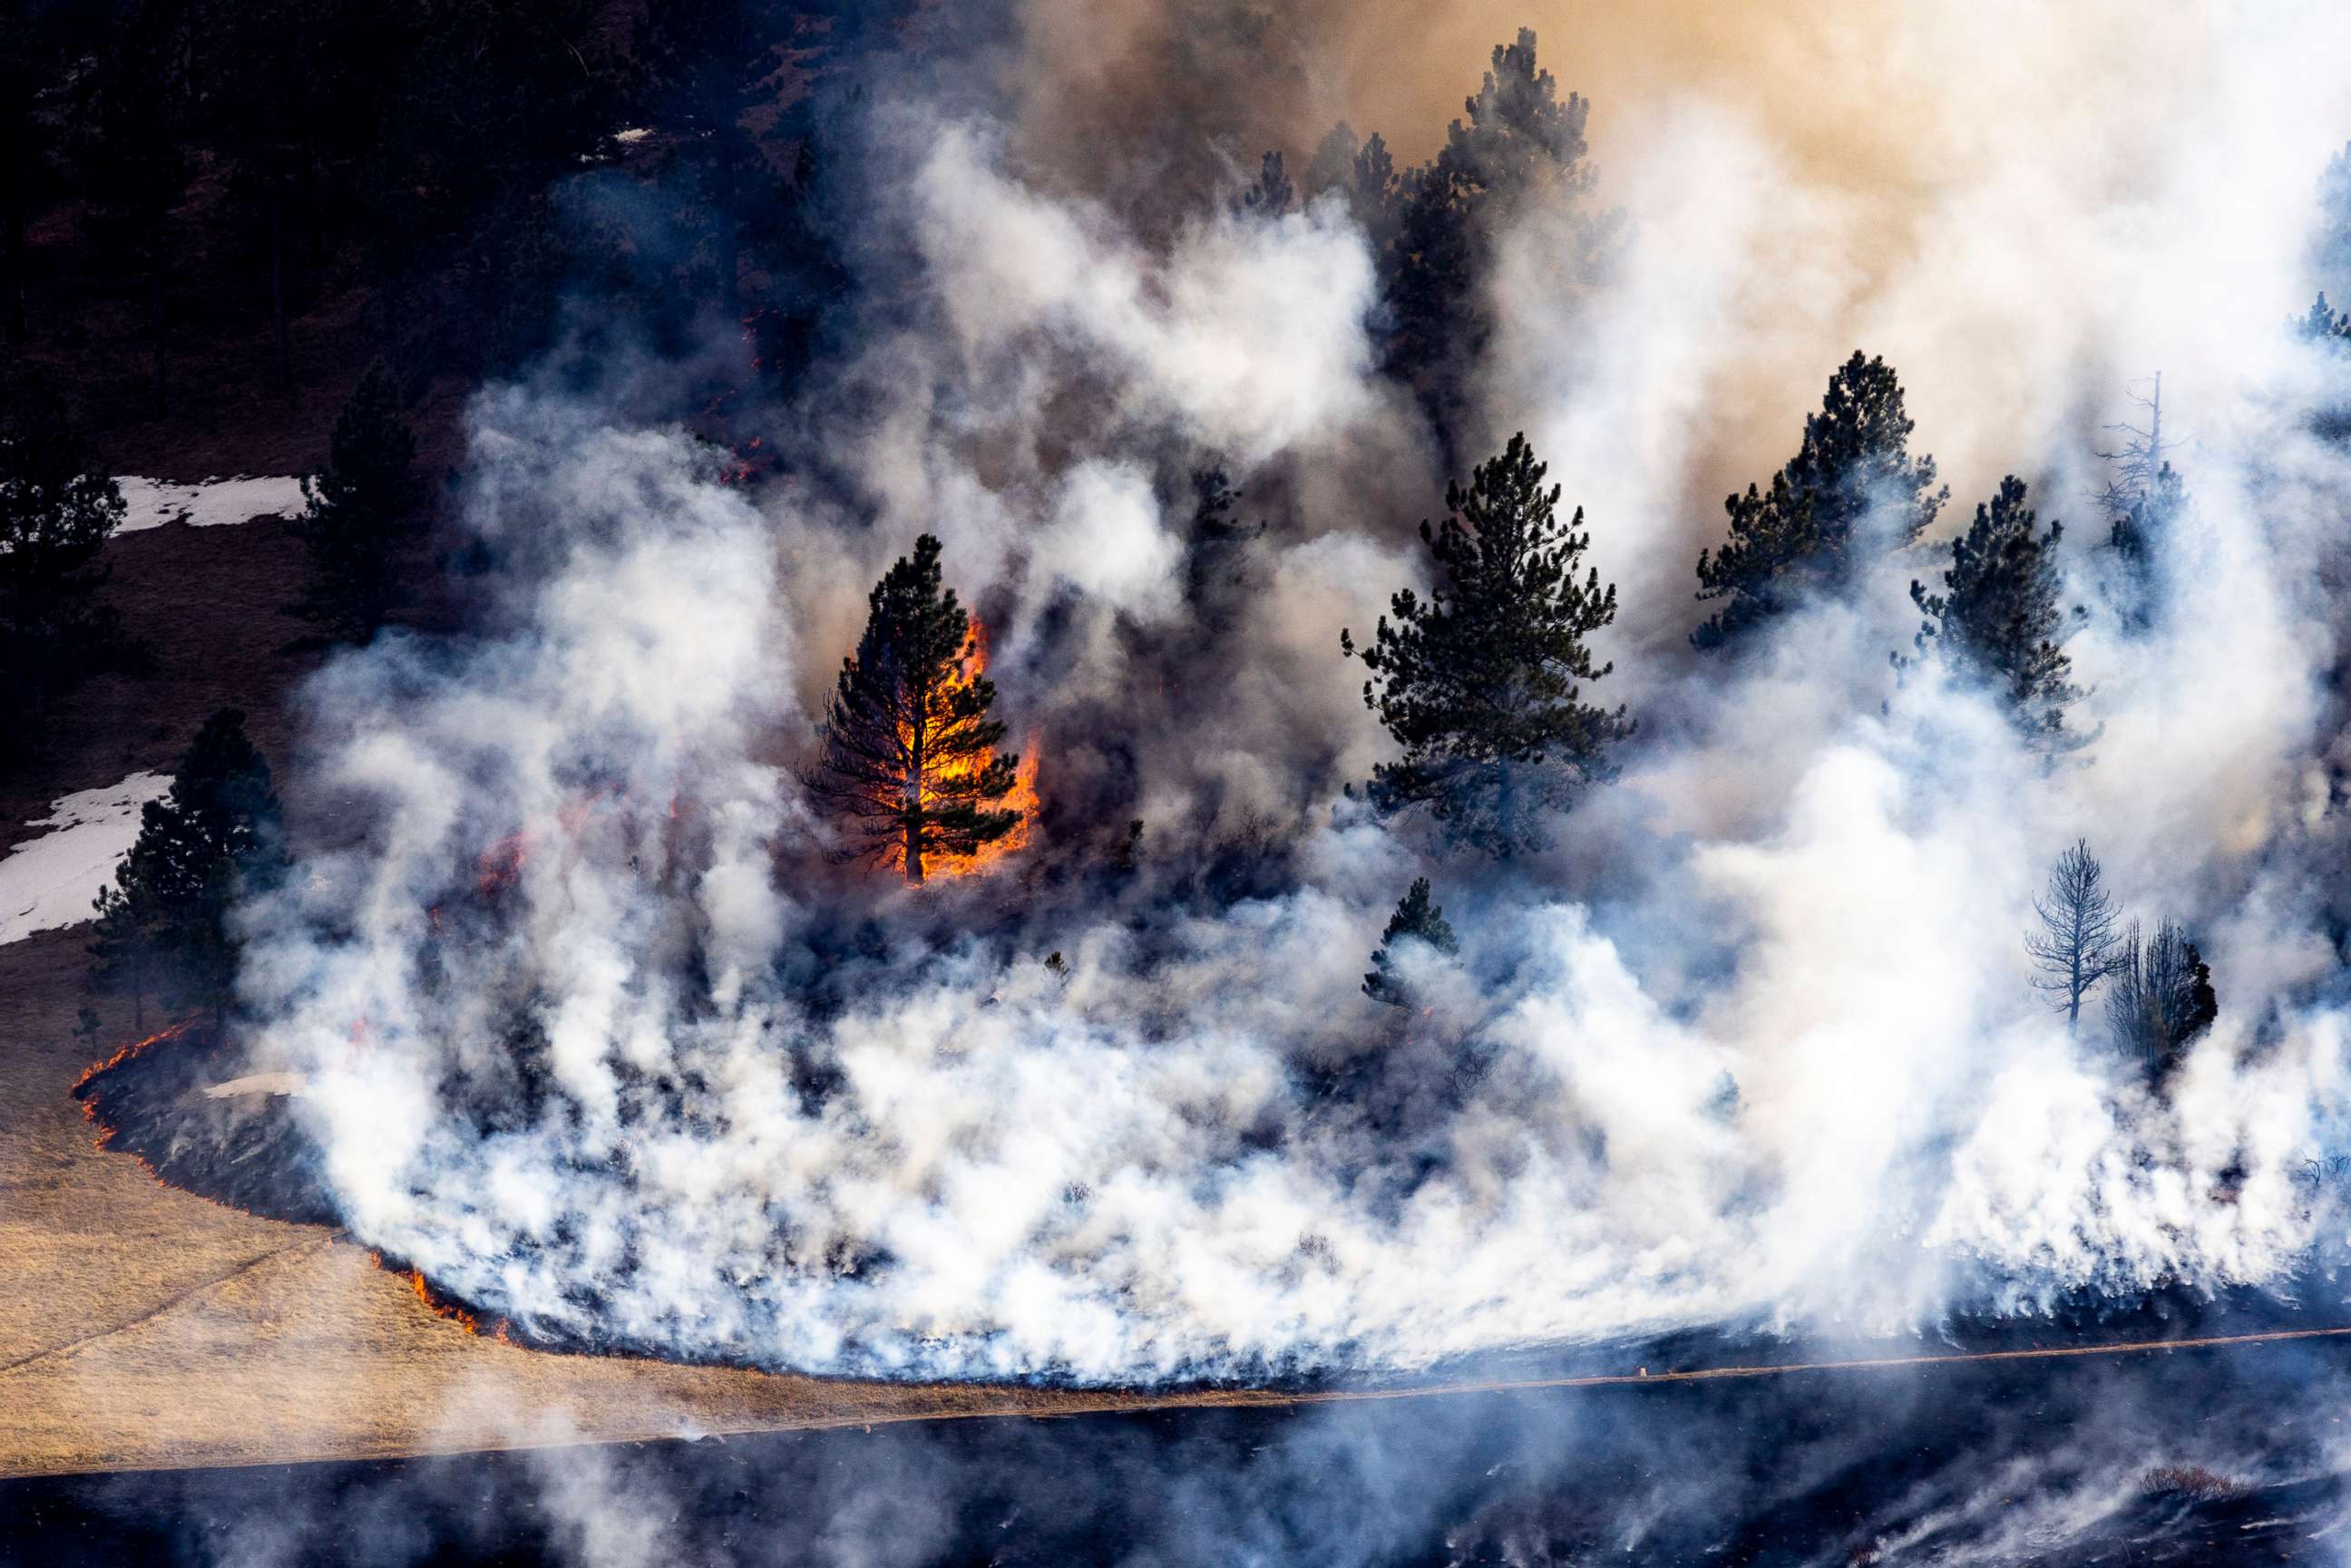 PHOTO: A tree goes up in flames as the NCAR Fire burns on March 26, 2022, in Boulder, Colorado. 